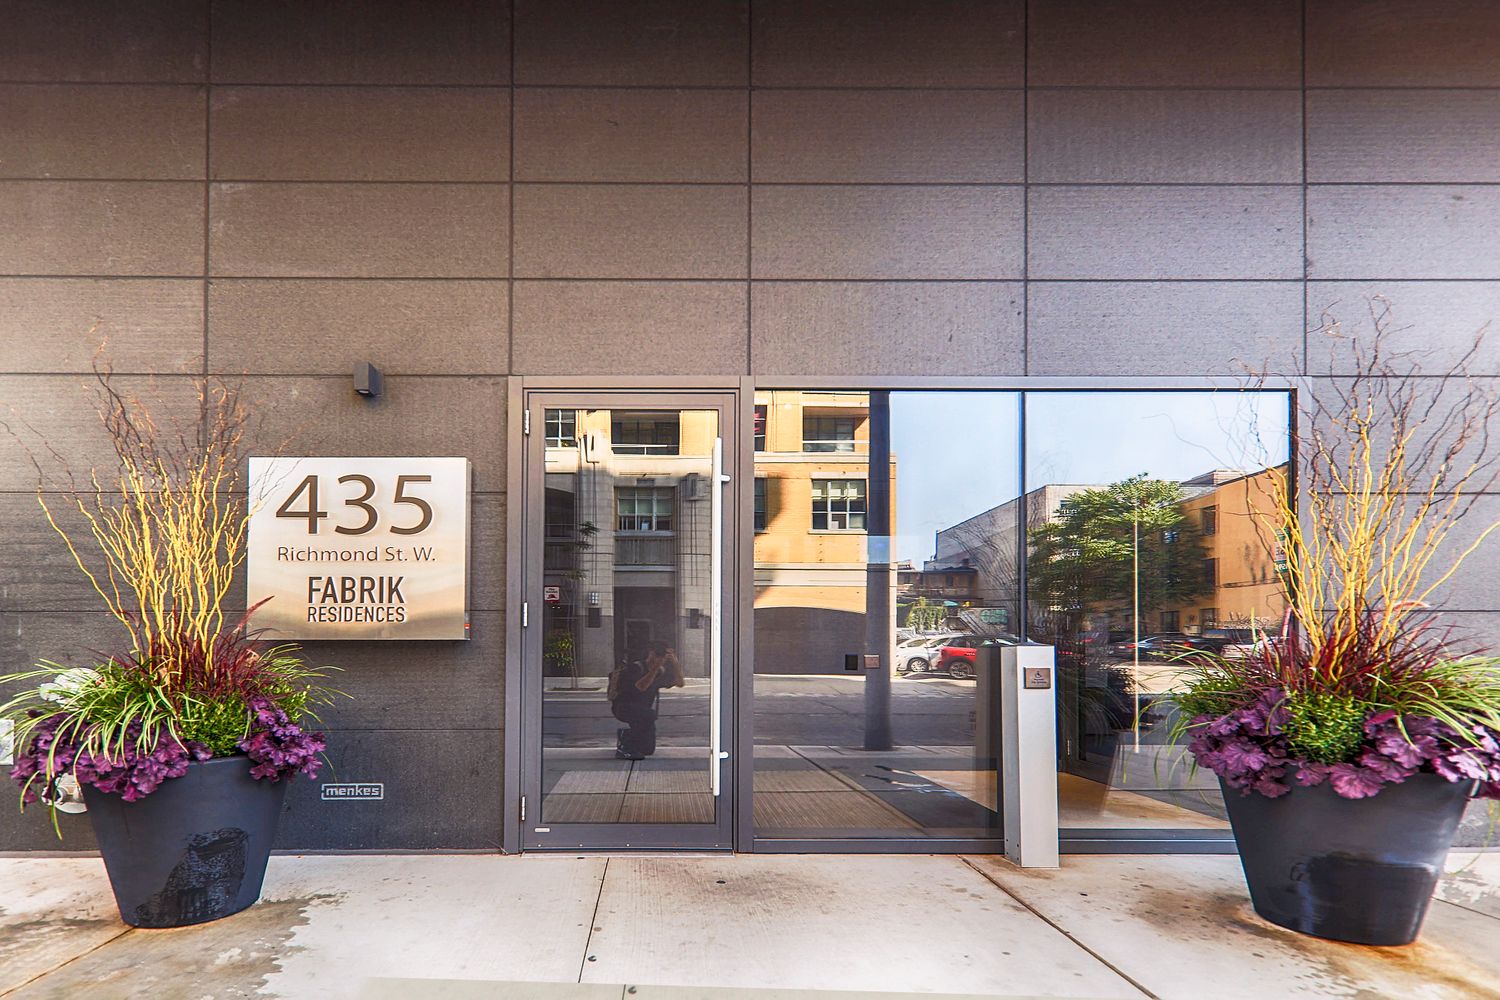 435 Richmond Street W. Fabrik Condos is located in  Downtown, Toronto - image #4 of 5